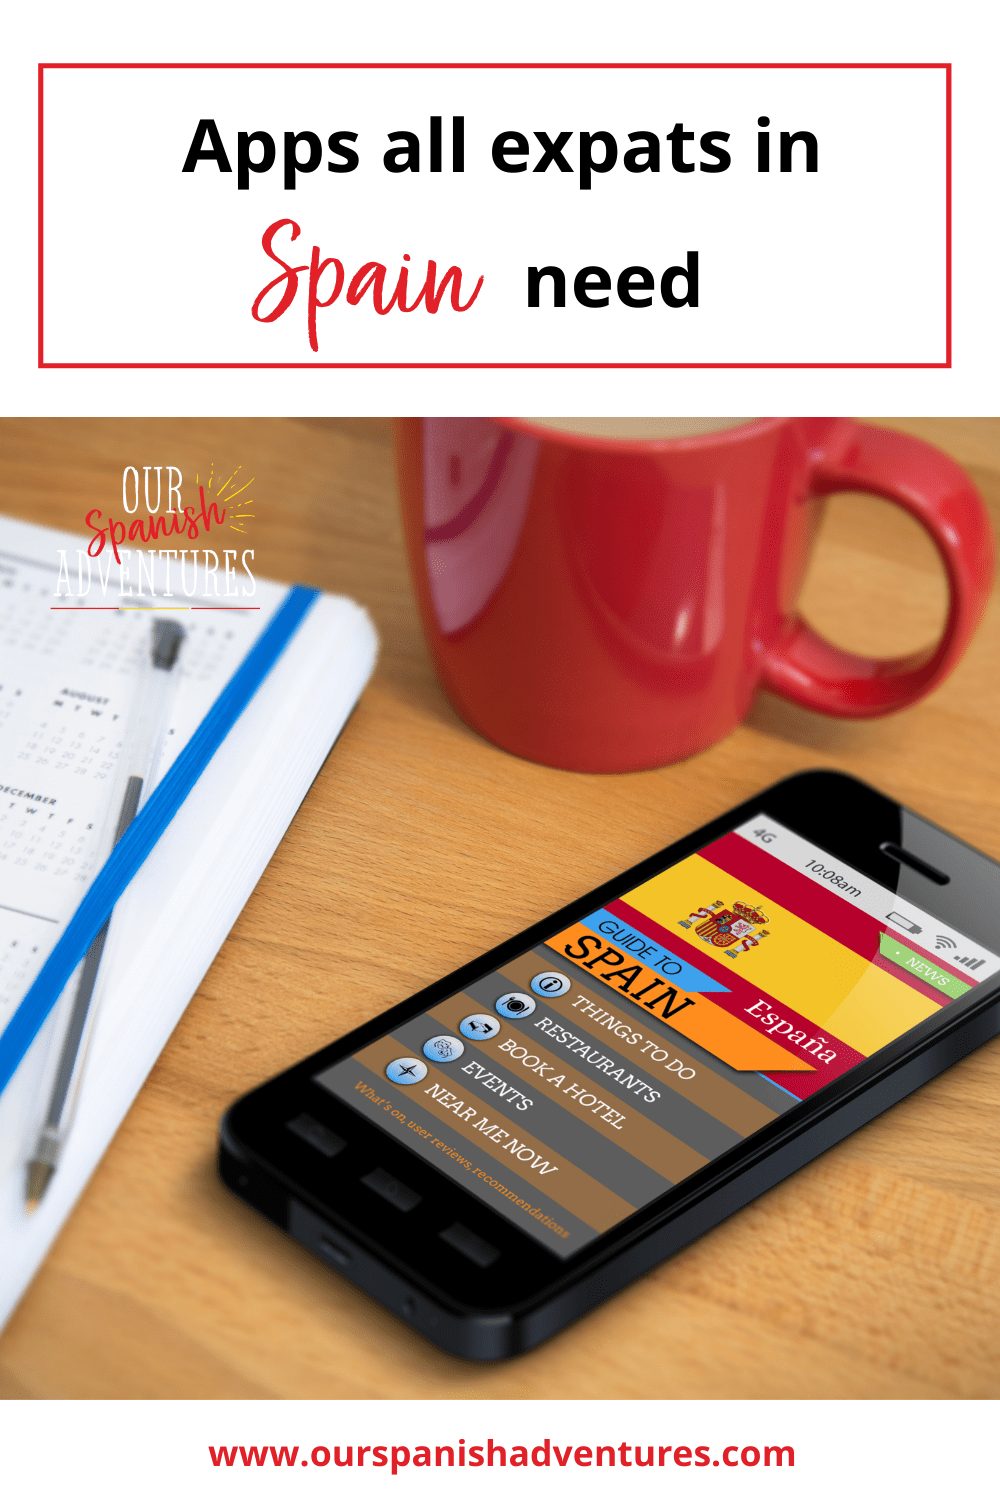 Apps all expats in Spain need | Our Spanish Adventures